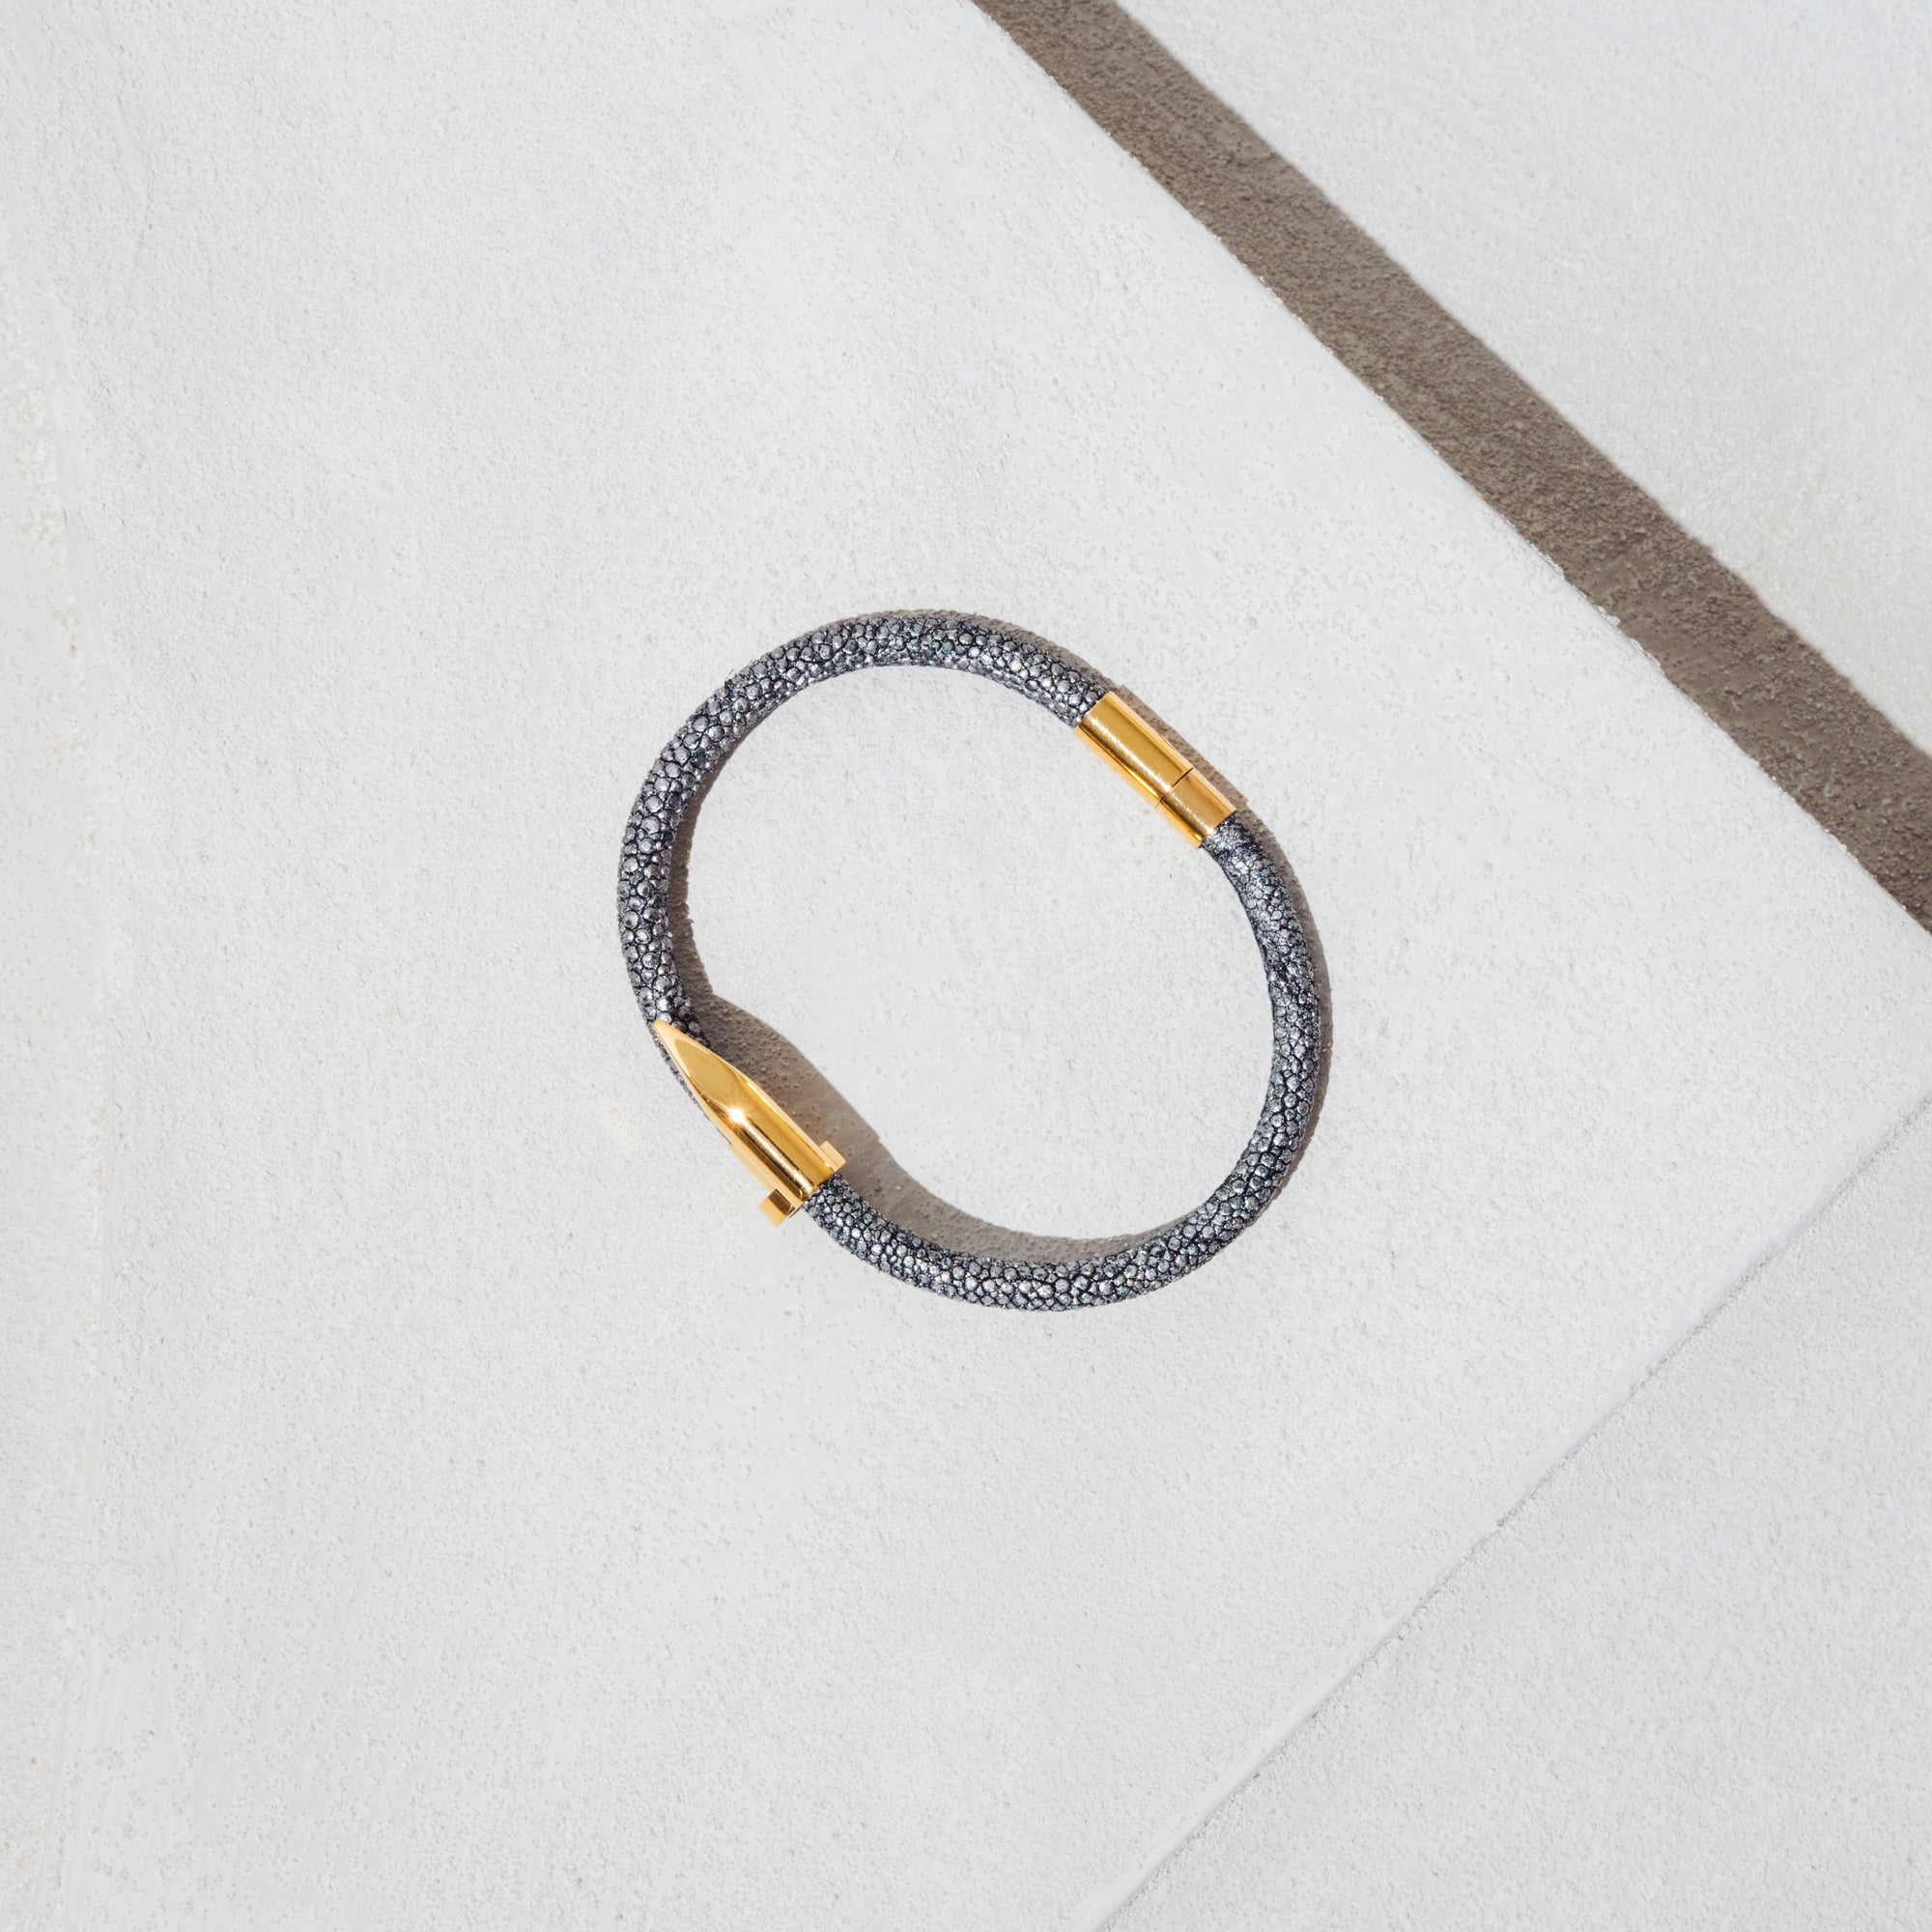 Needle bracelet (silver with gold)